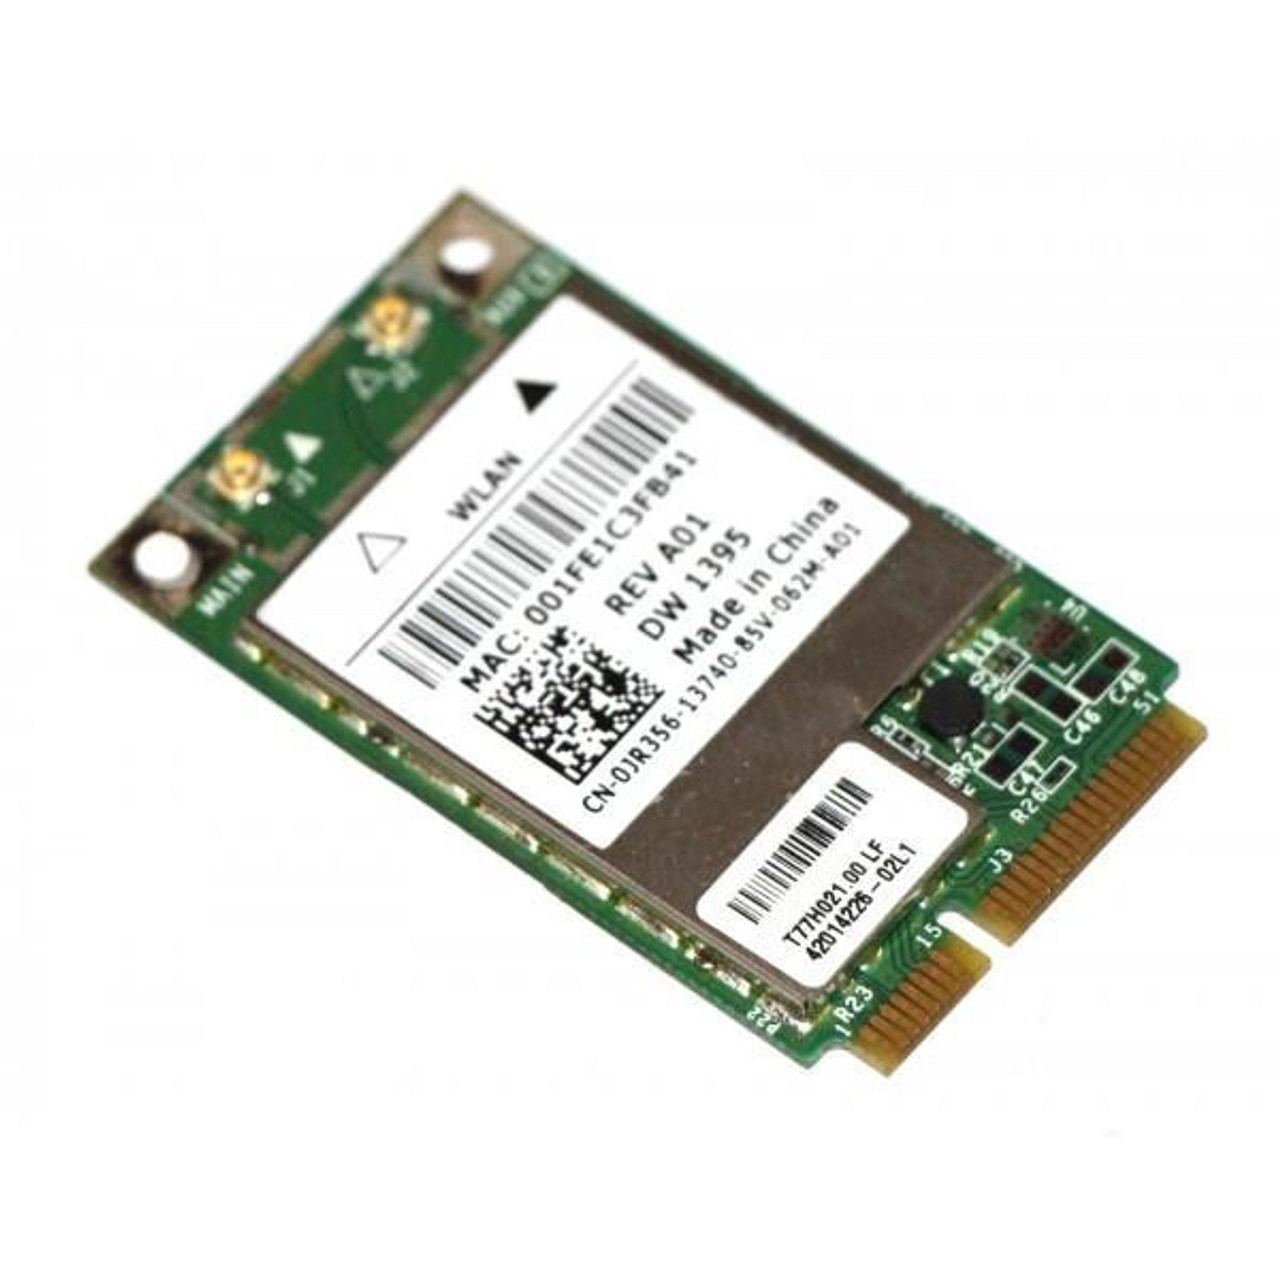 0JR356 Dell 54Mbps IEEE 802.11 a/b/g Mini PCI Express Wireless G Network Card for Inspiron 1420